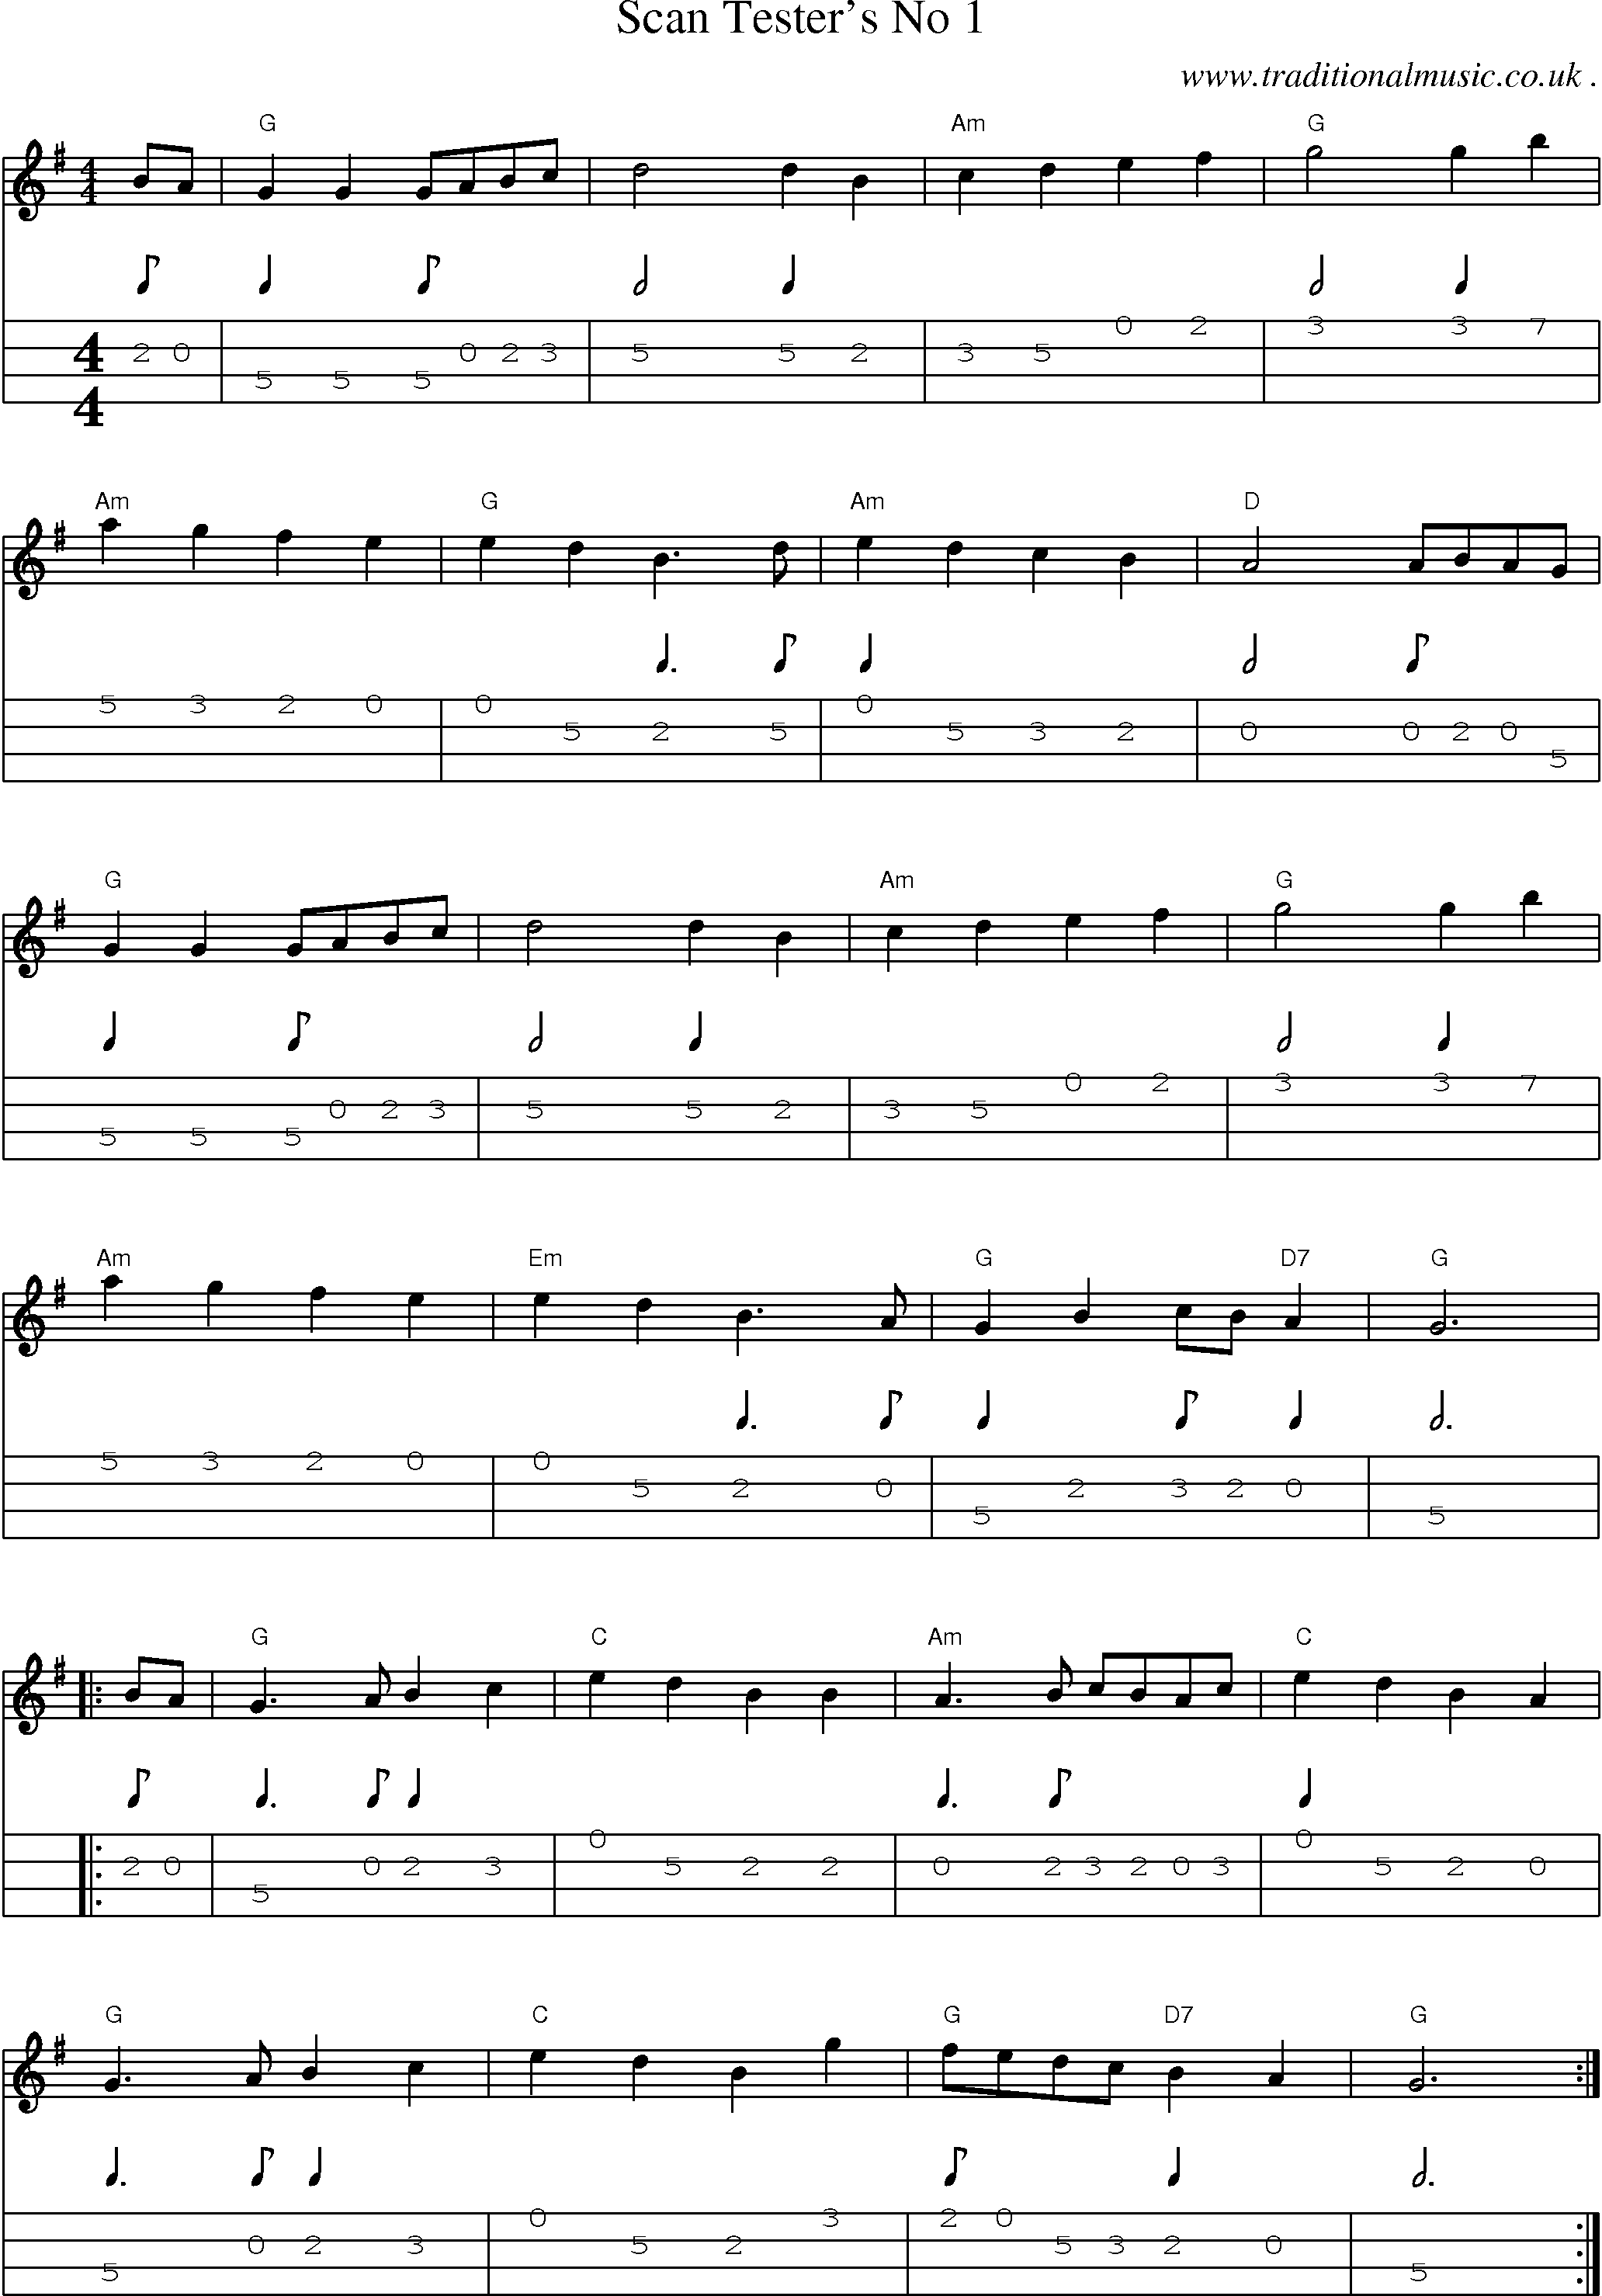 Music Score and Guitar Tabs for Scan Testers No 1